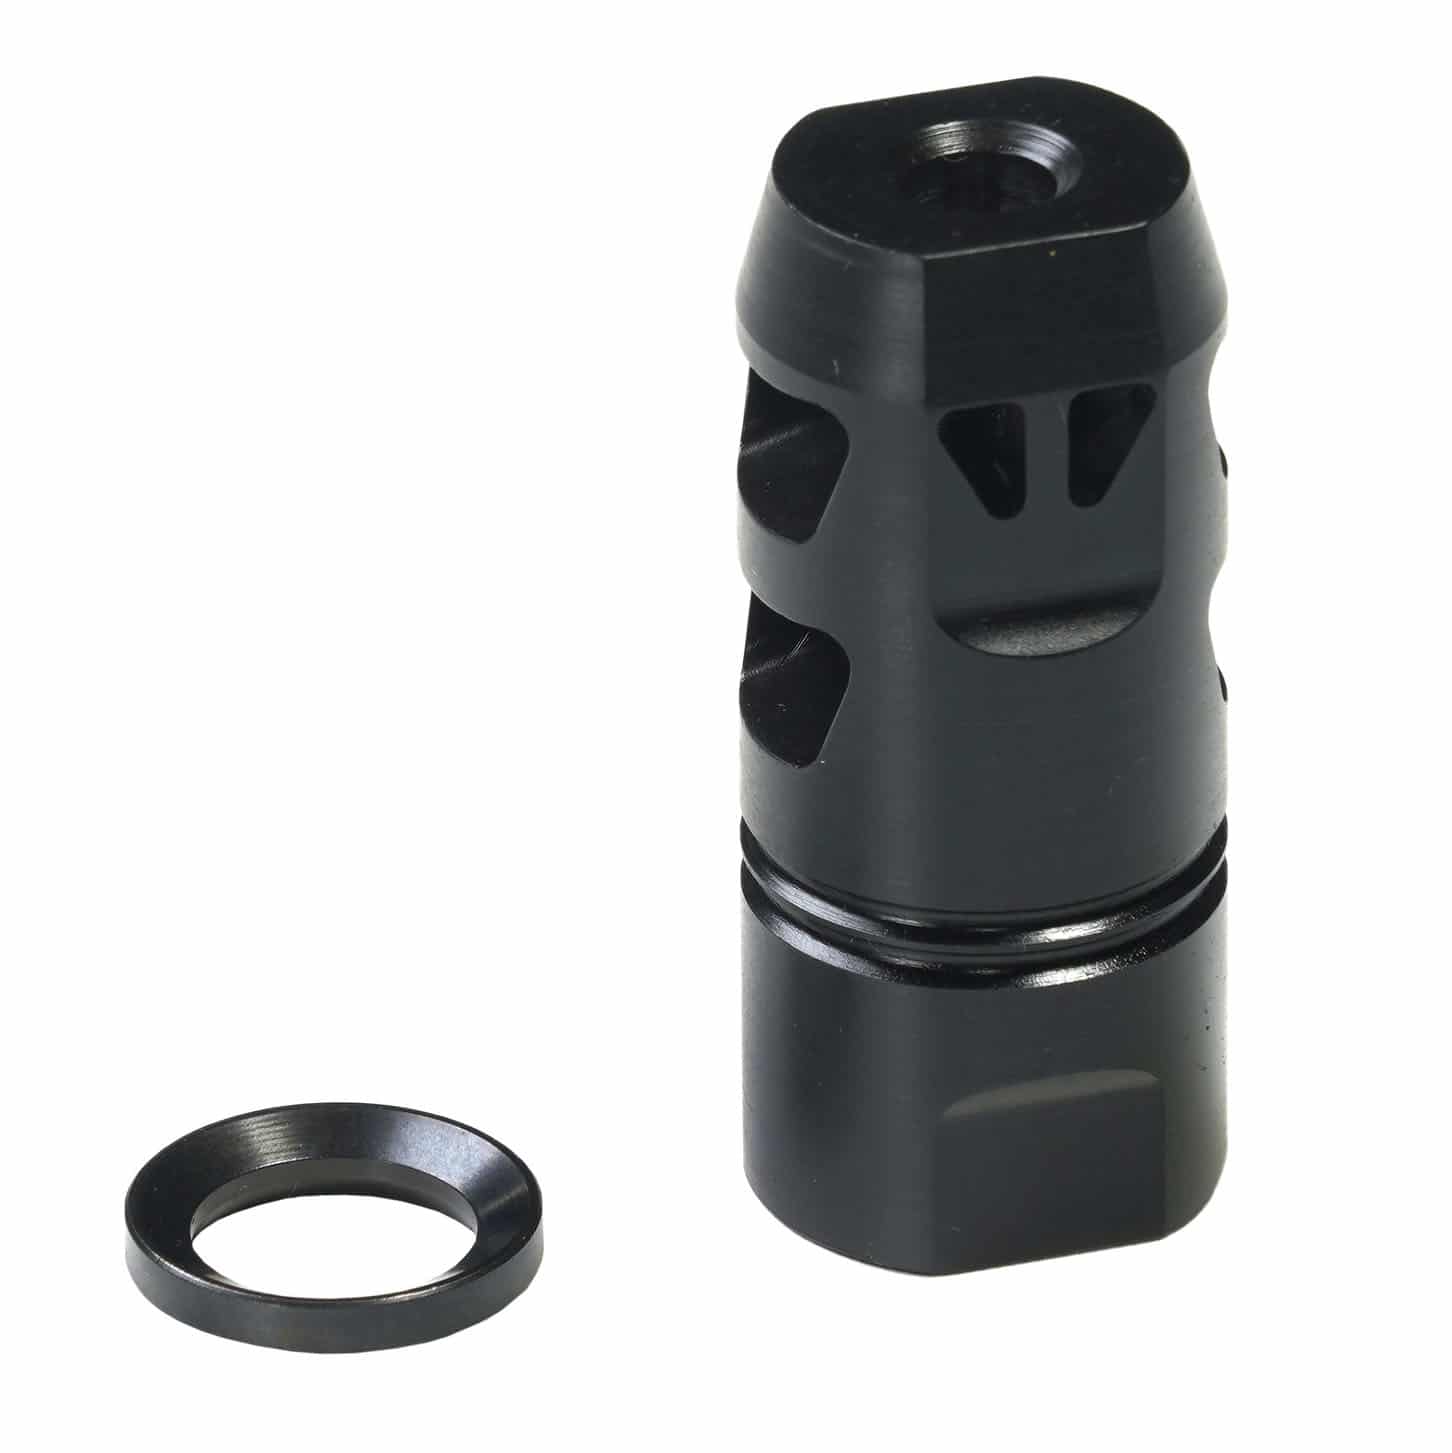 https://www.at3tactical.com/wp-content/uploads/CMMG-AR-15-Zeroed-Muzzle-Brake-with-Crush-Washer-556-NATO-4.jpg